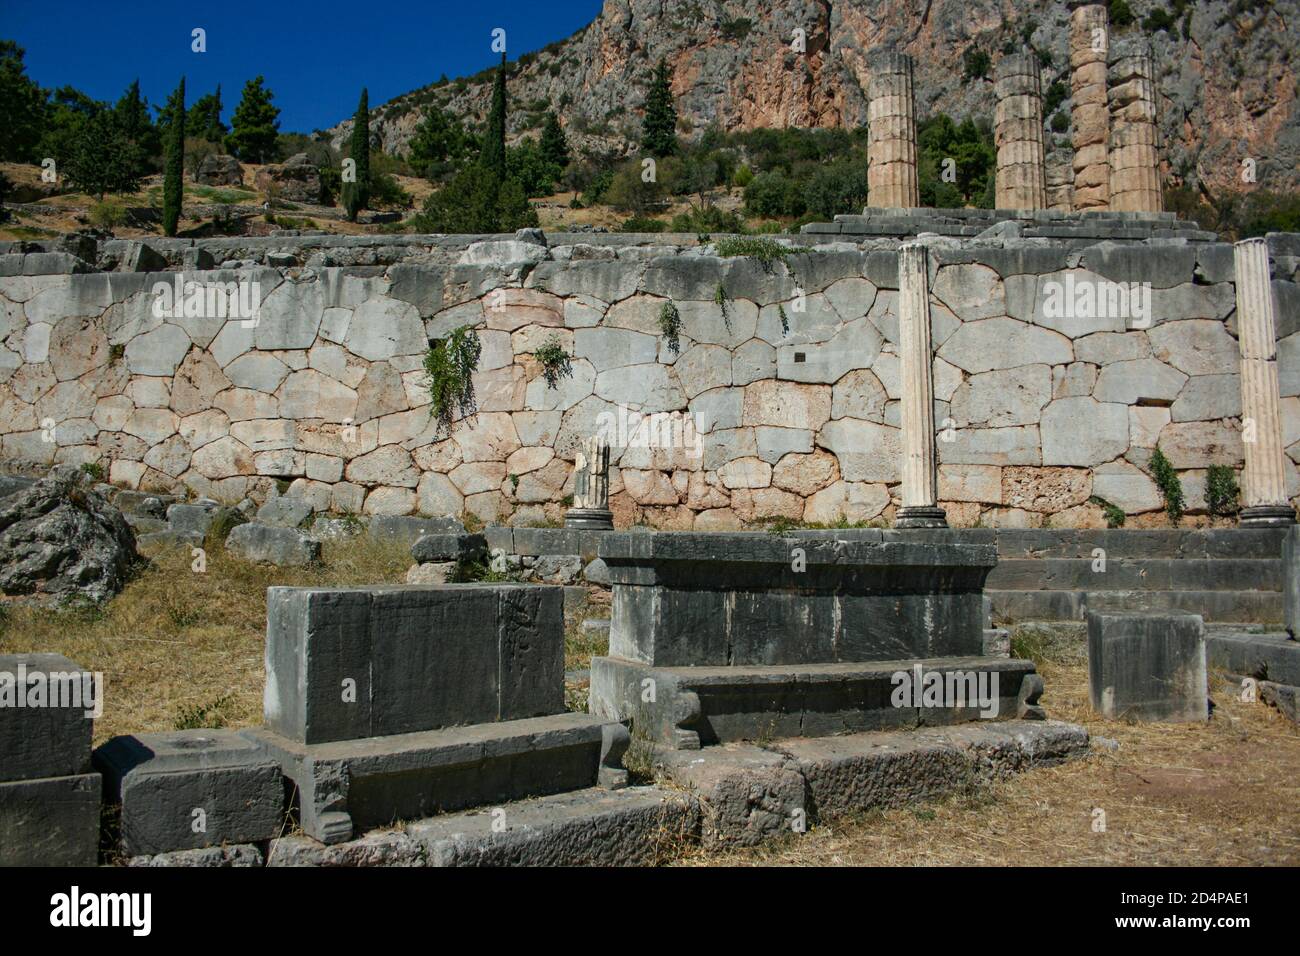 View of the sanctuary of Apollo in Delphi. In the background is the Temple of Apollo and the Stoa of the Athenians. Stock Photo